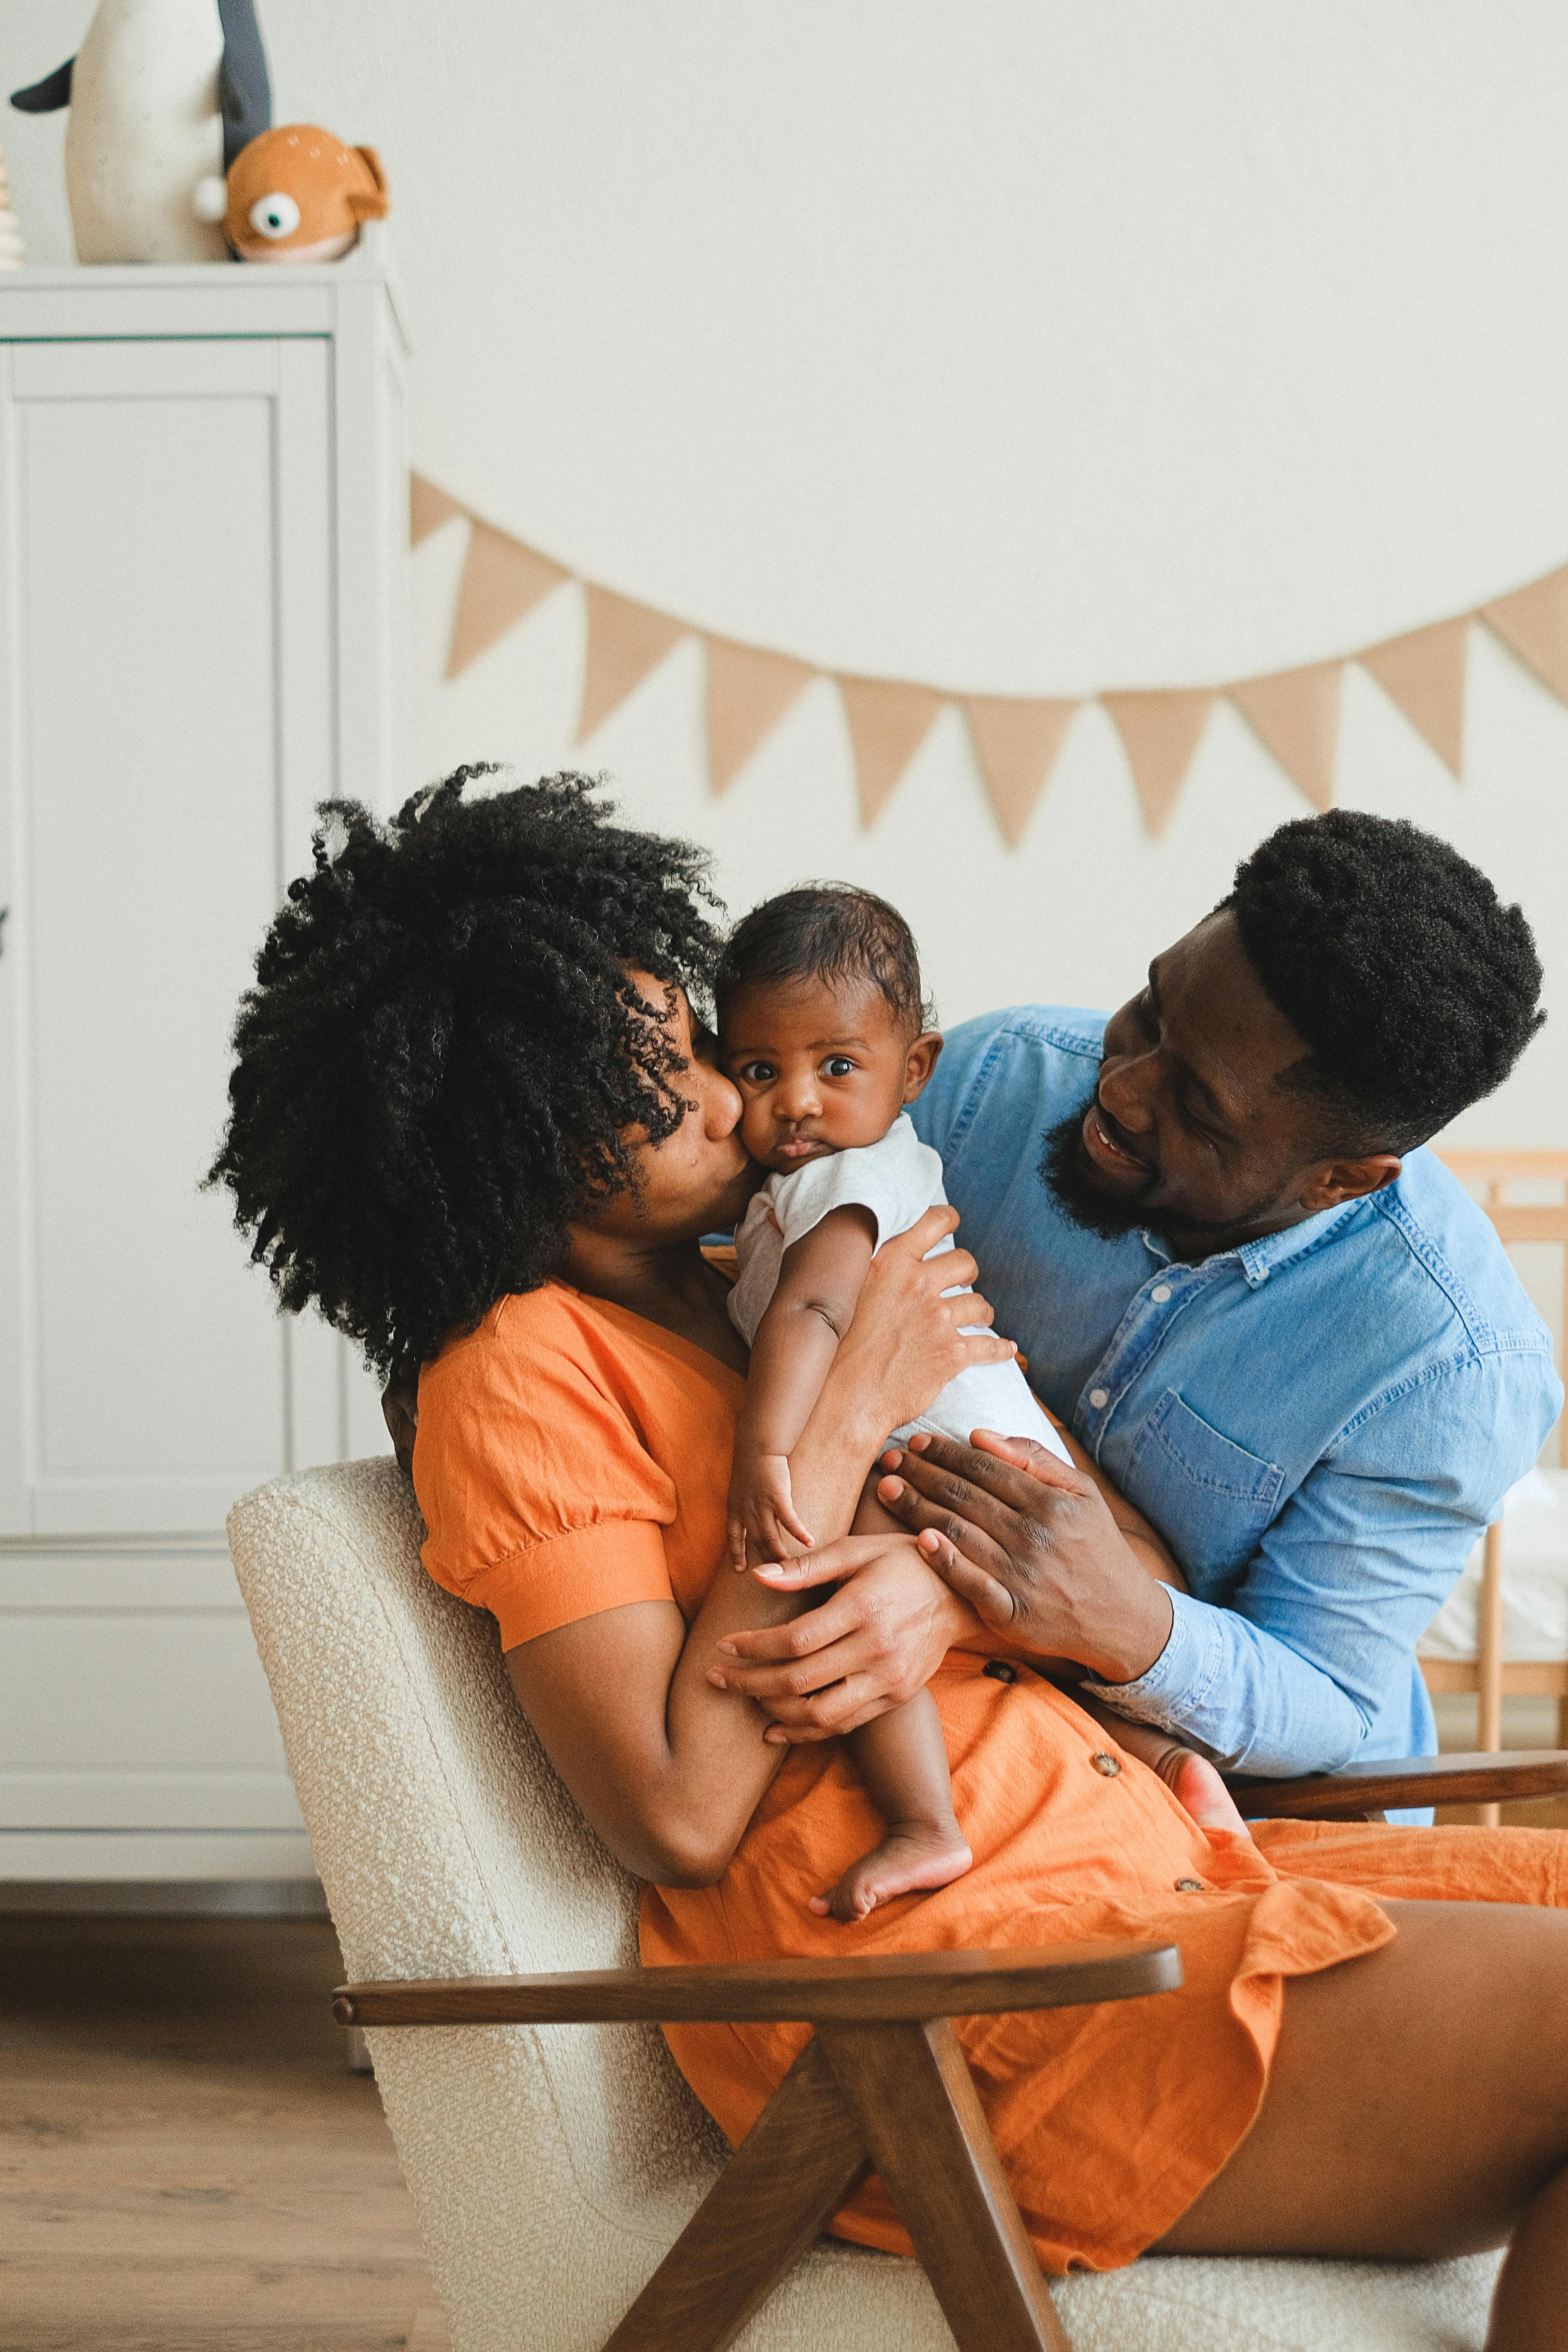 A couple embracing their baby | Source: Pexels